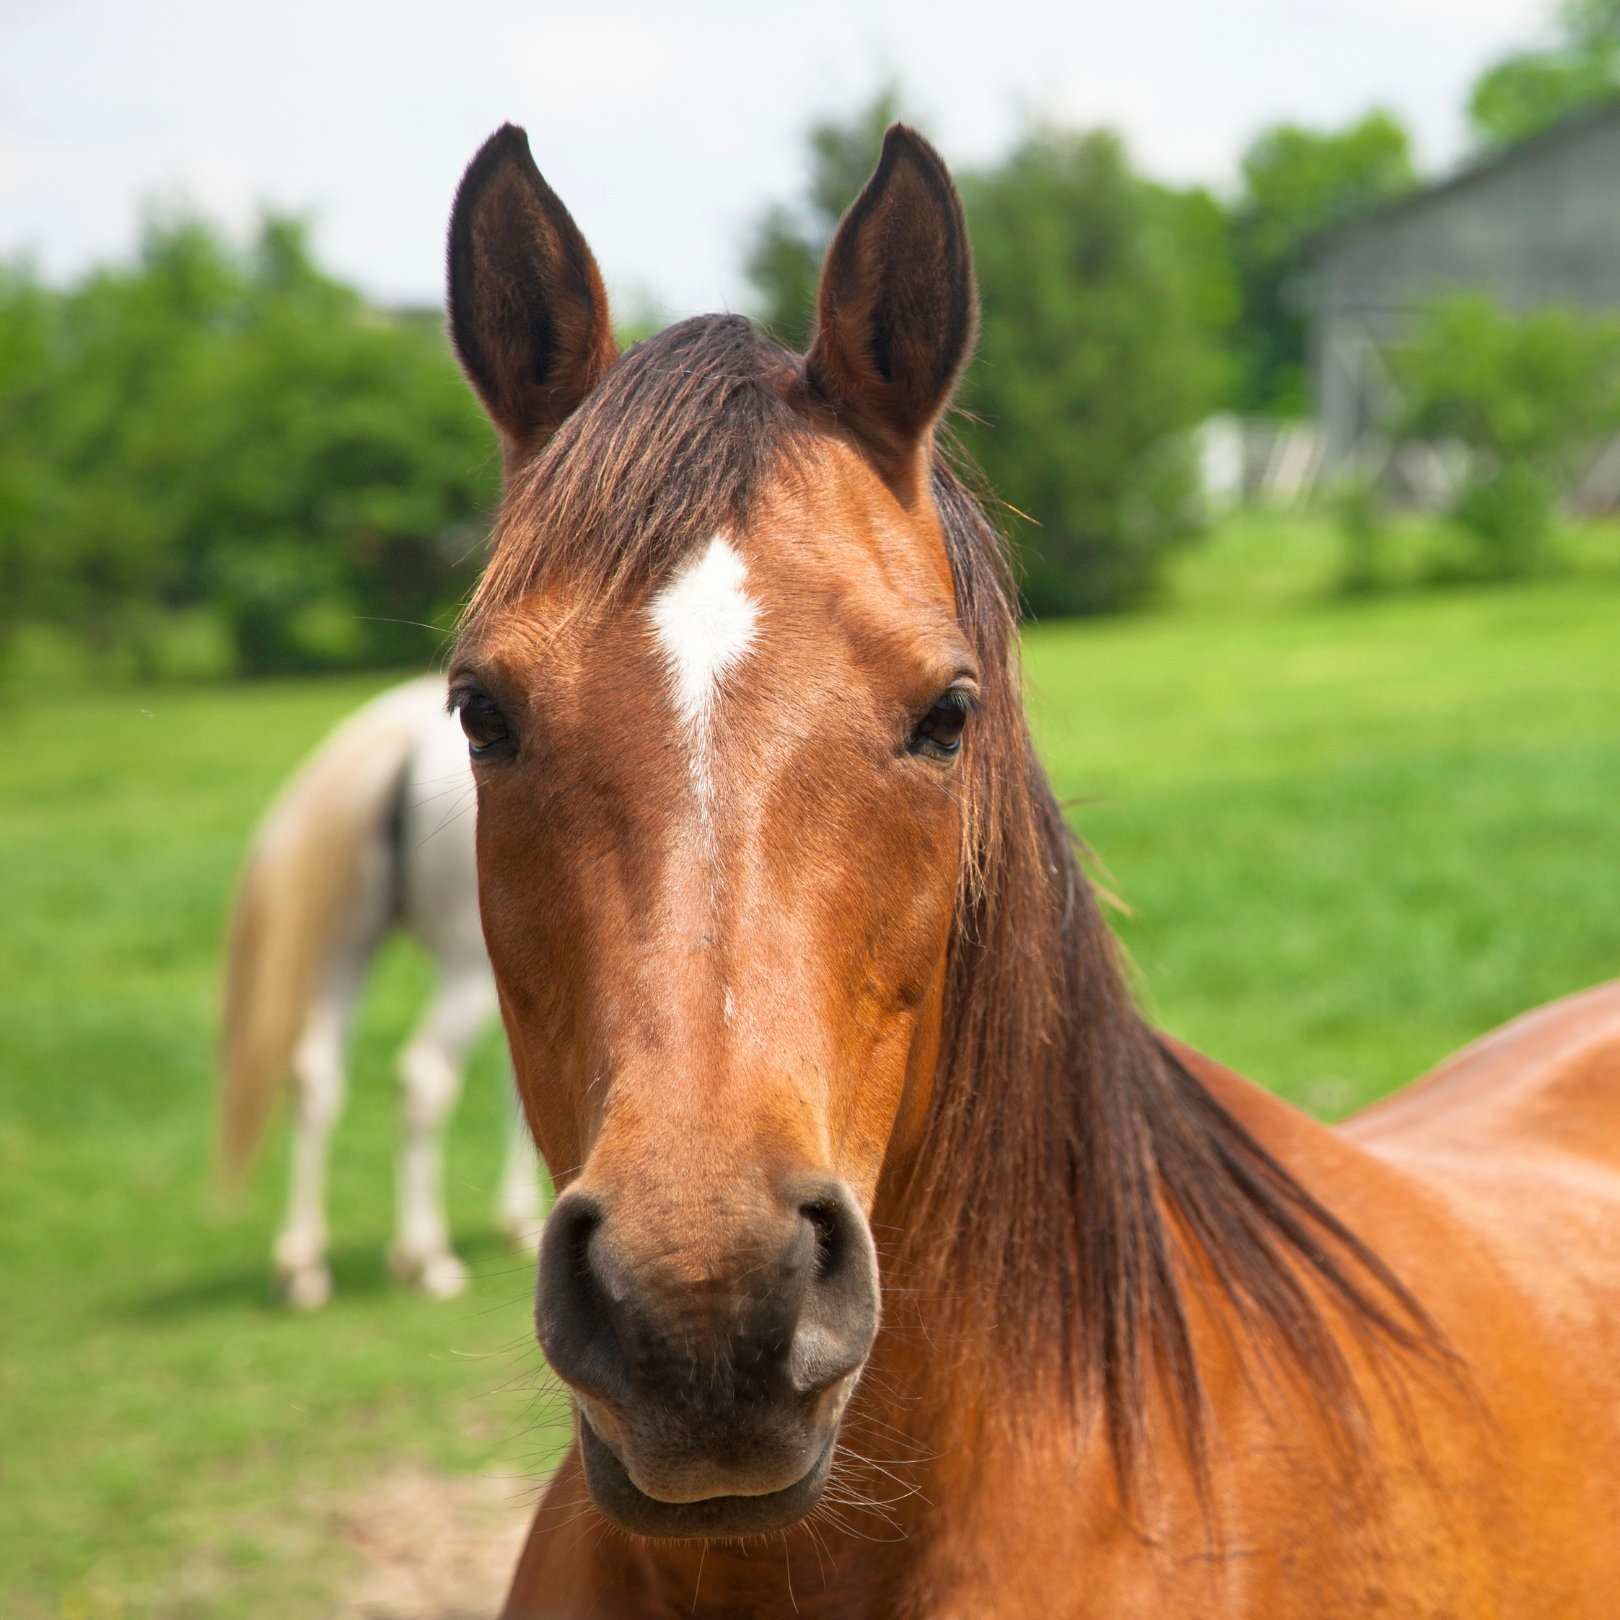 Coggins tests for Equine Infectious Anemia